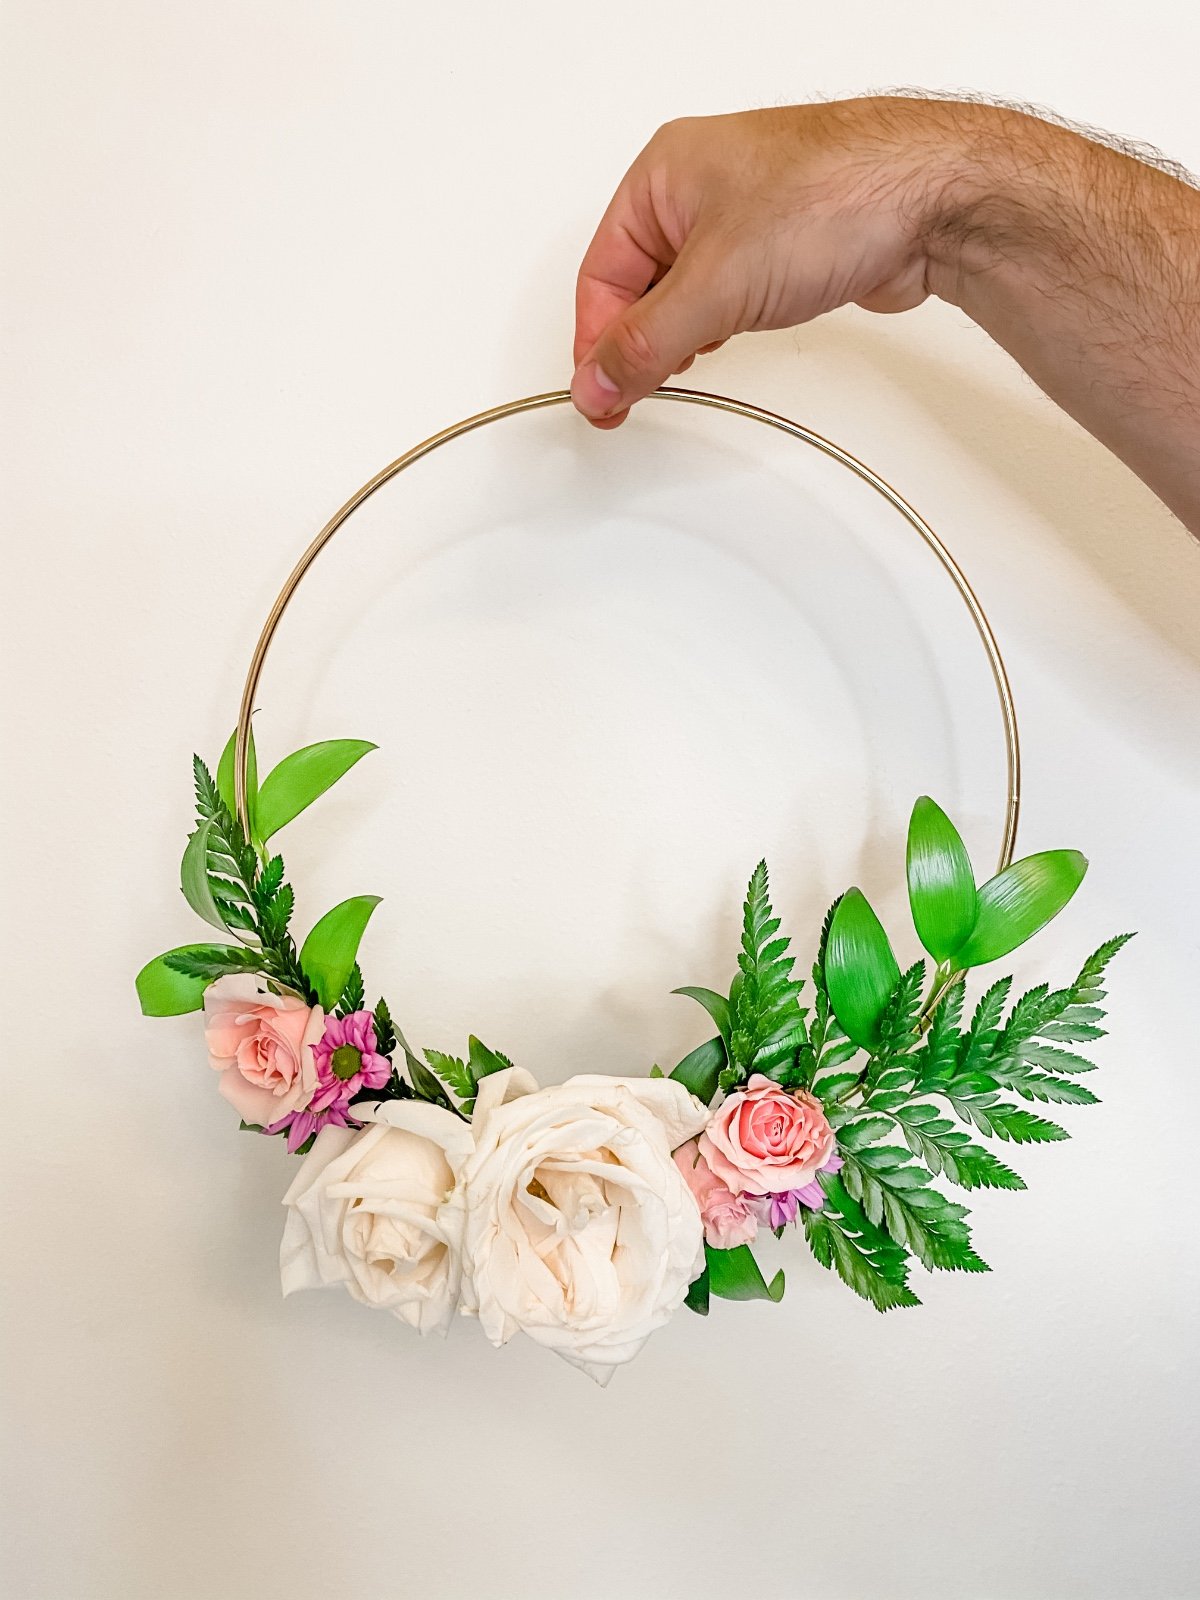 How to Make a Romantic Ring Bouquet